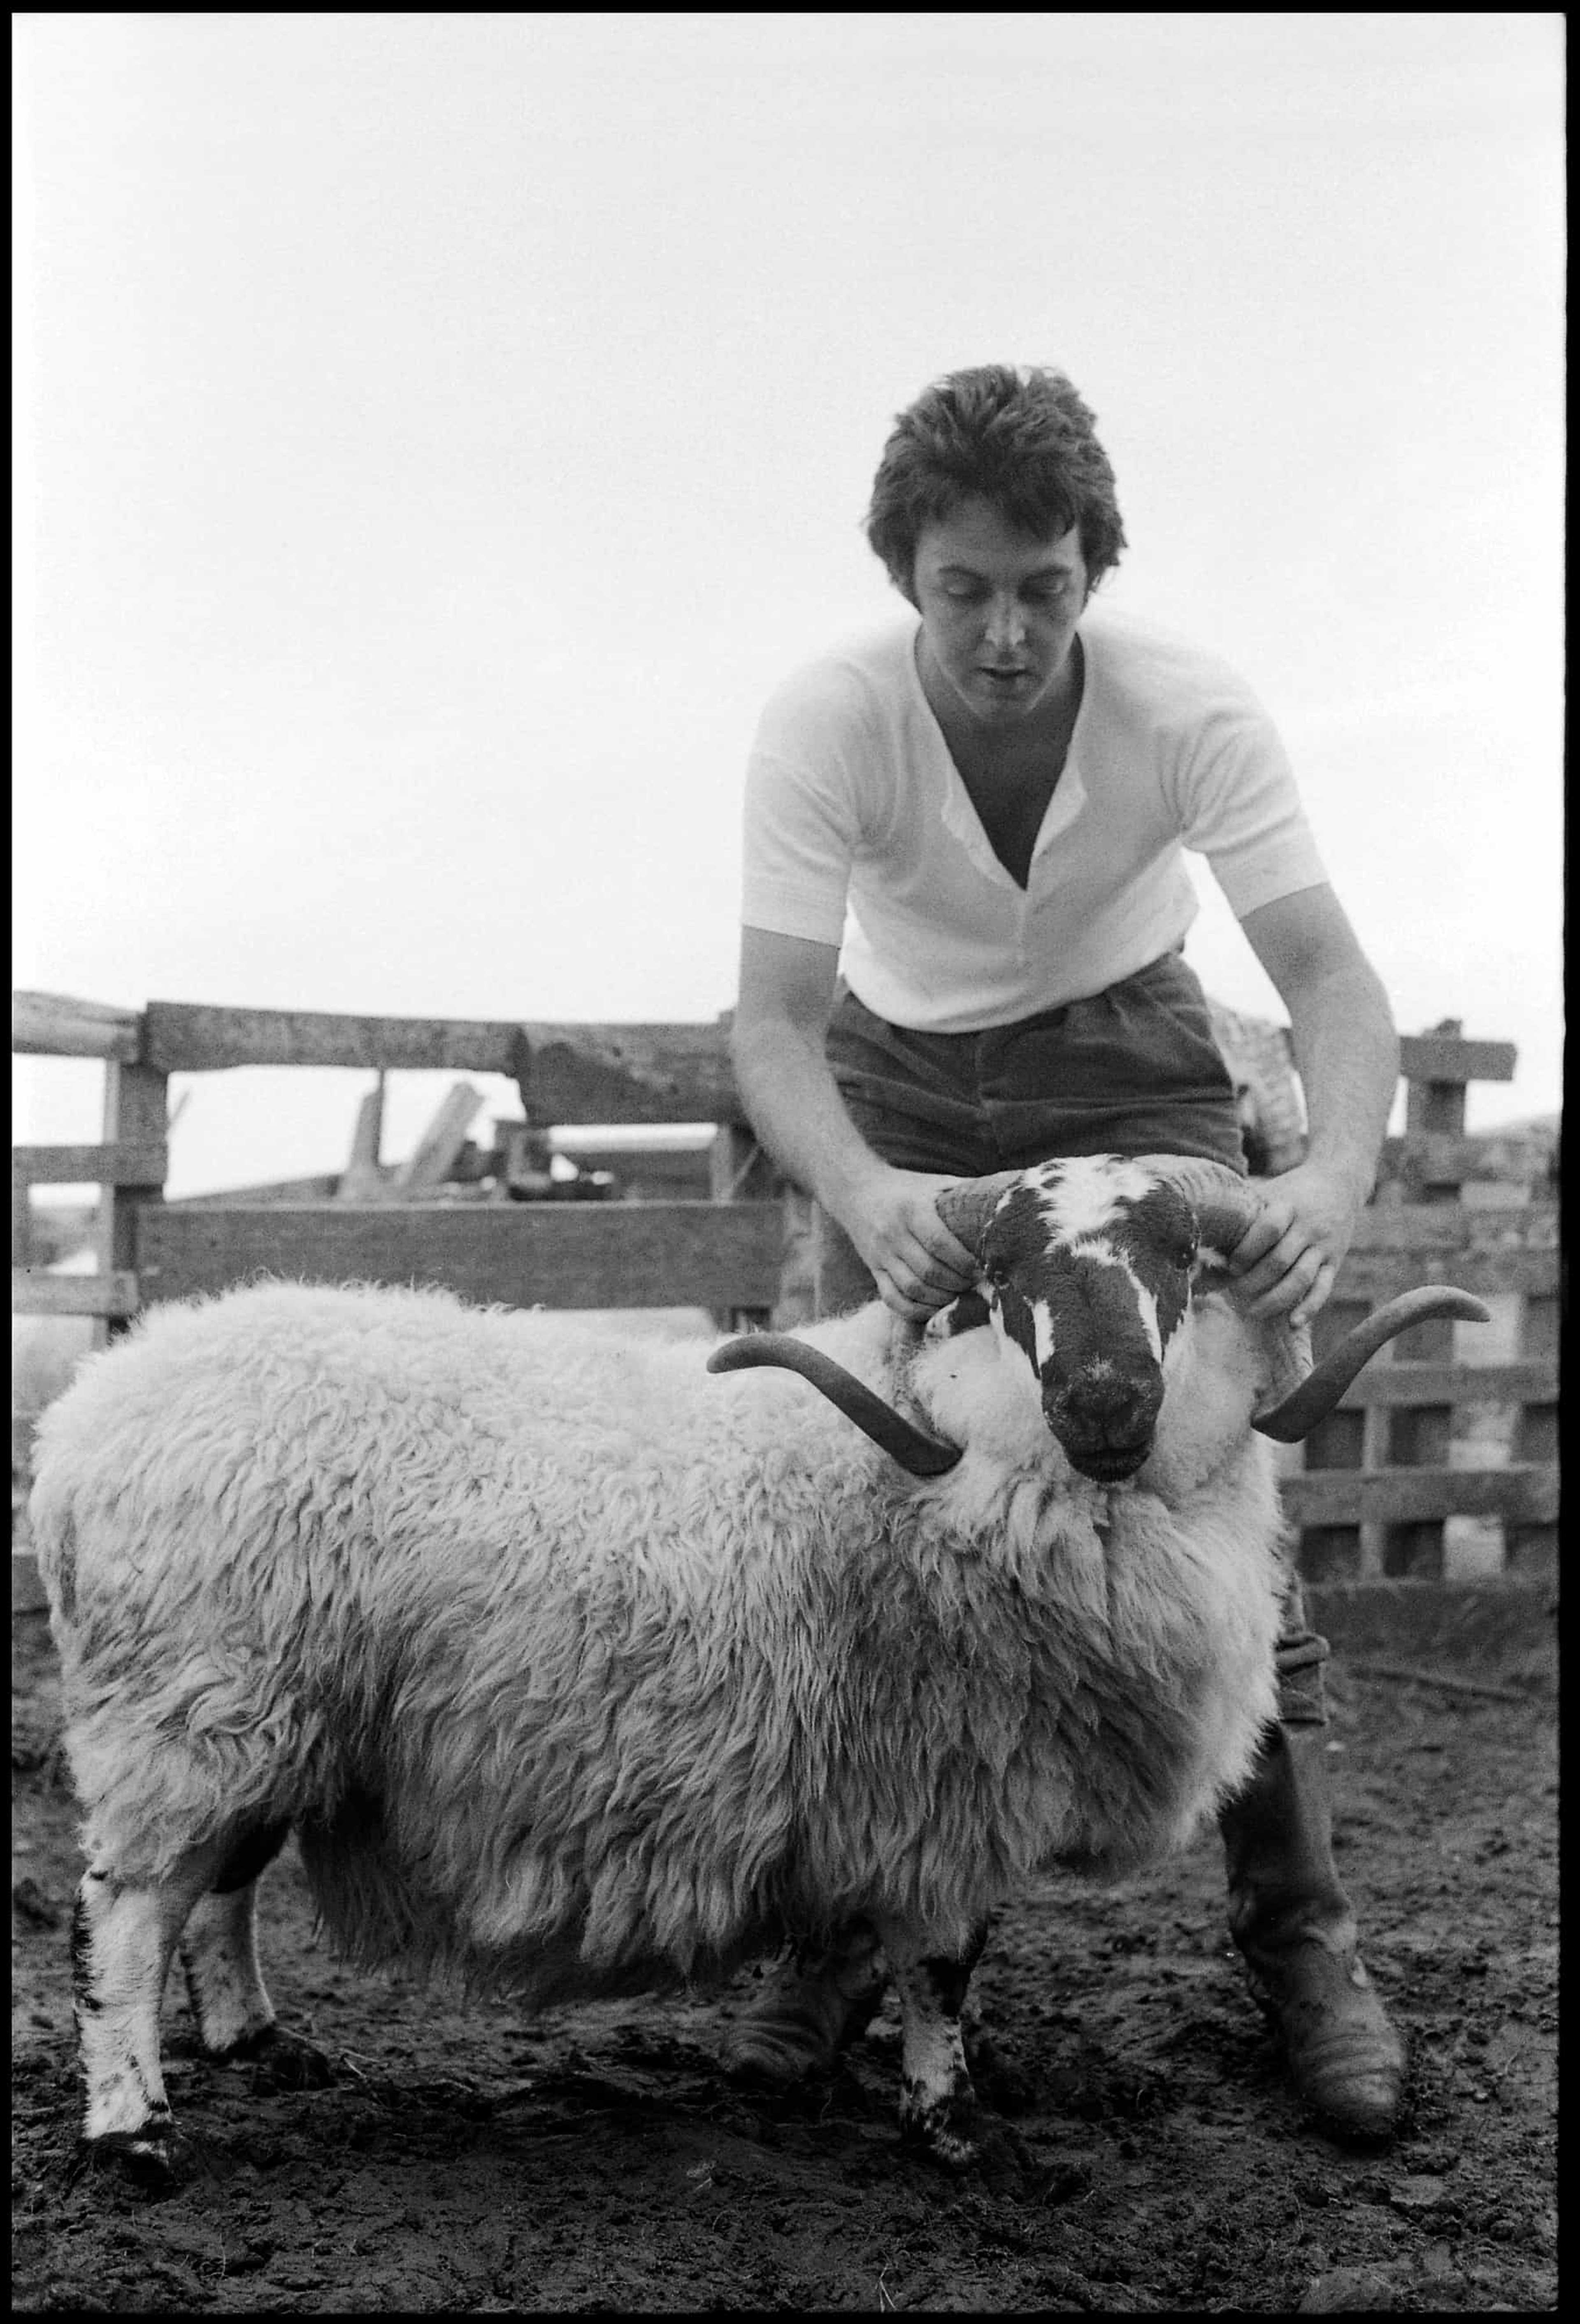 Paul holding a ram by its horns